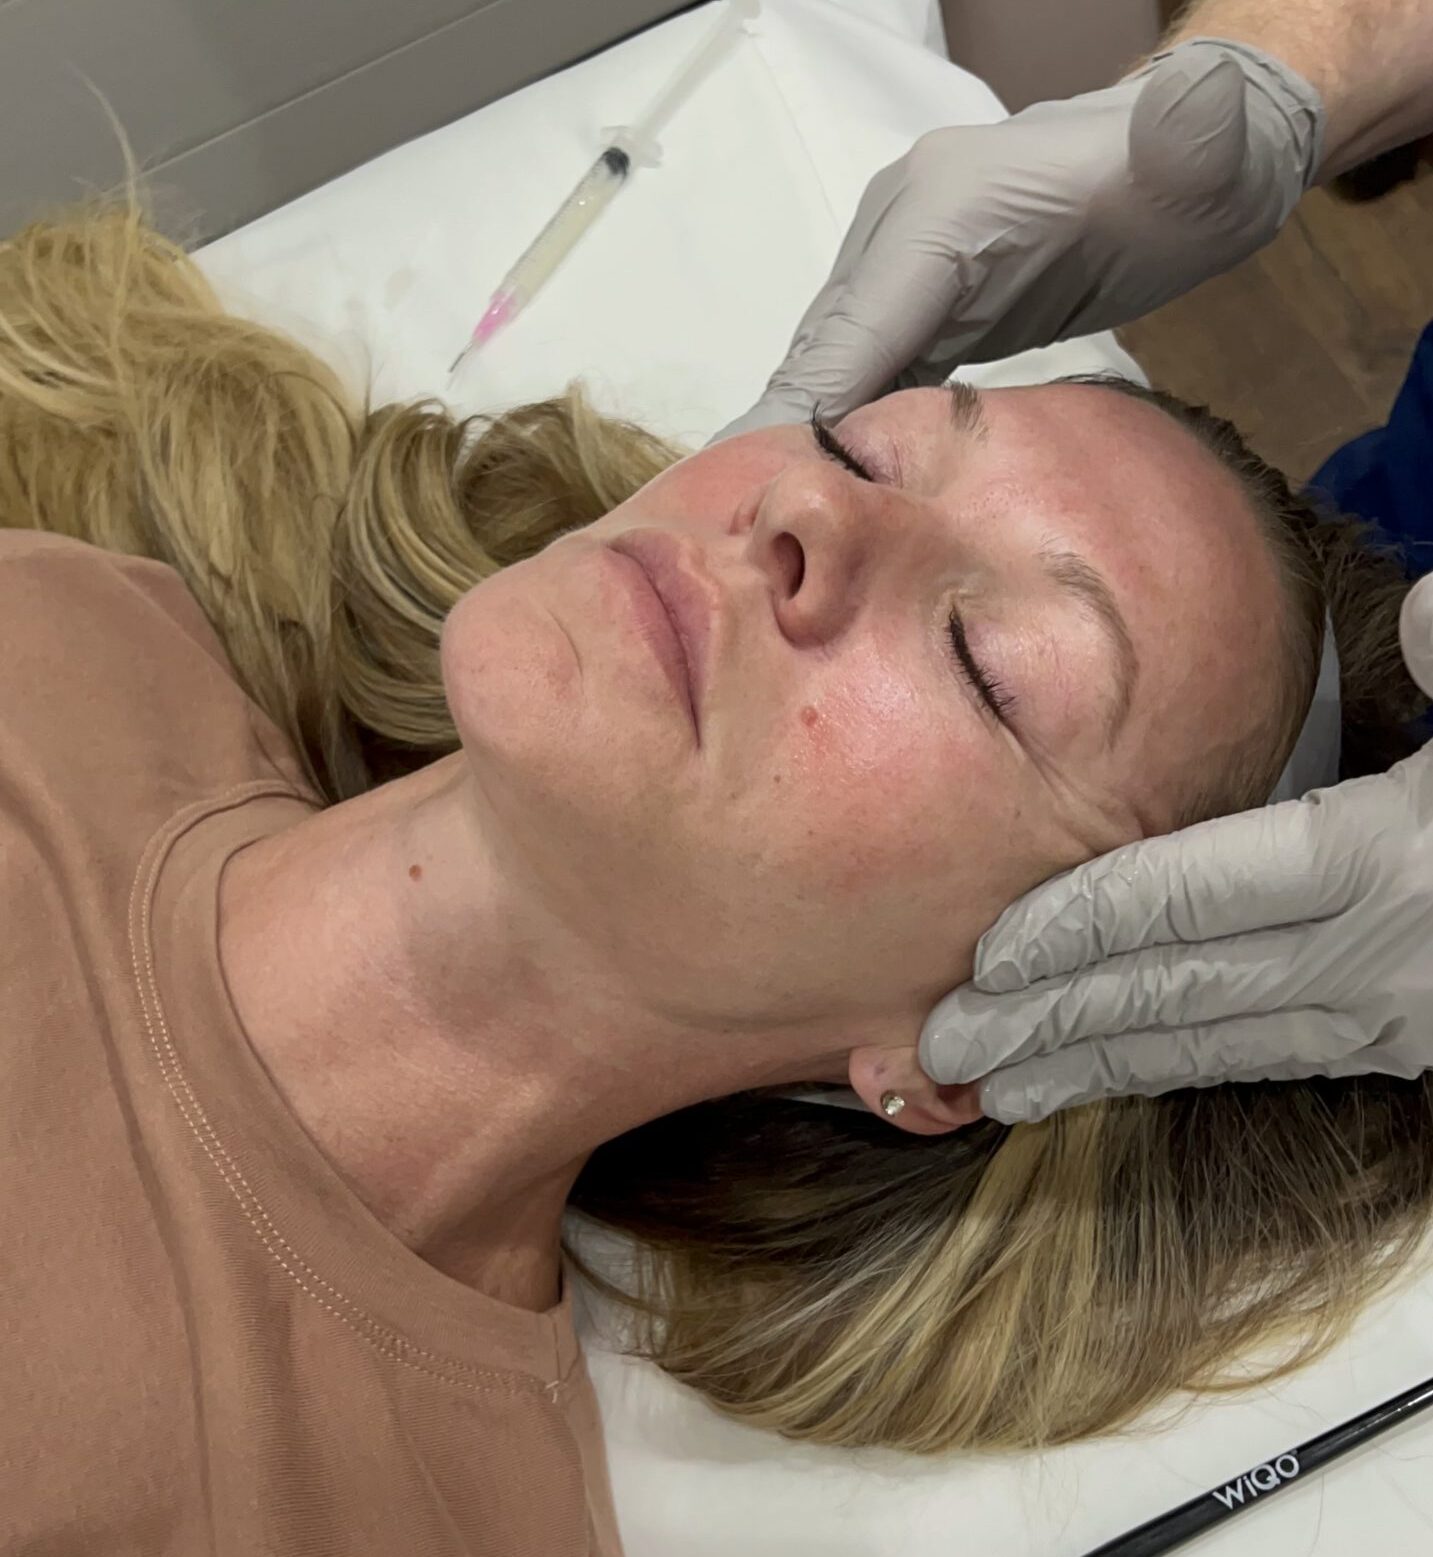 Chemical peels treatment at Cultivated Beauty Aesthetic in Guntersville, AL